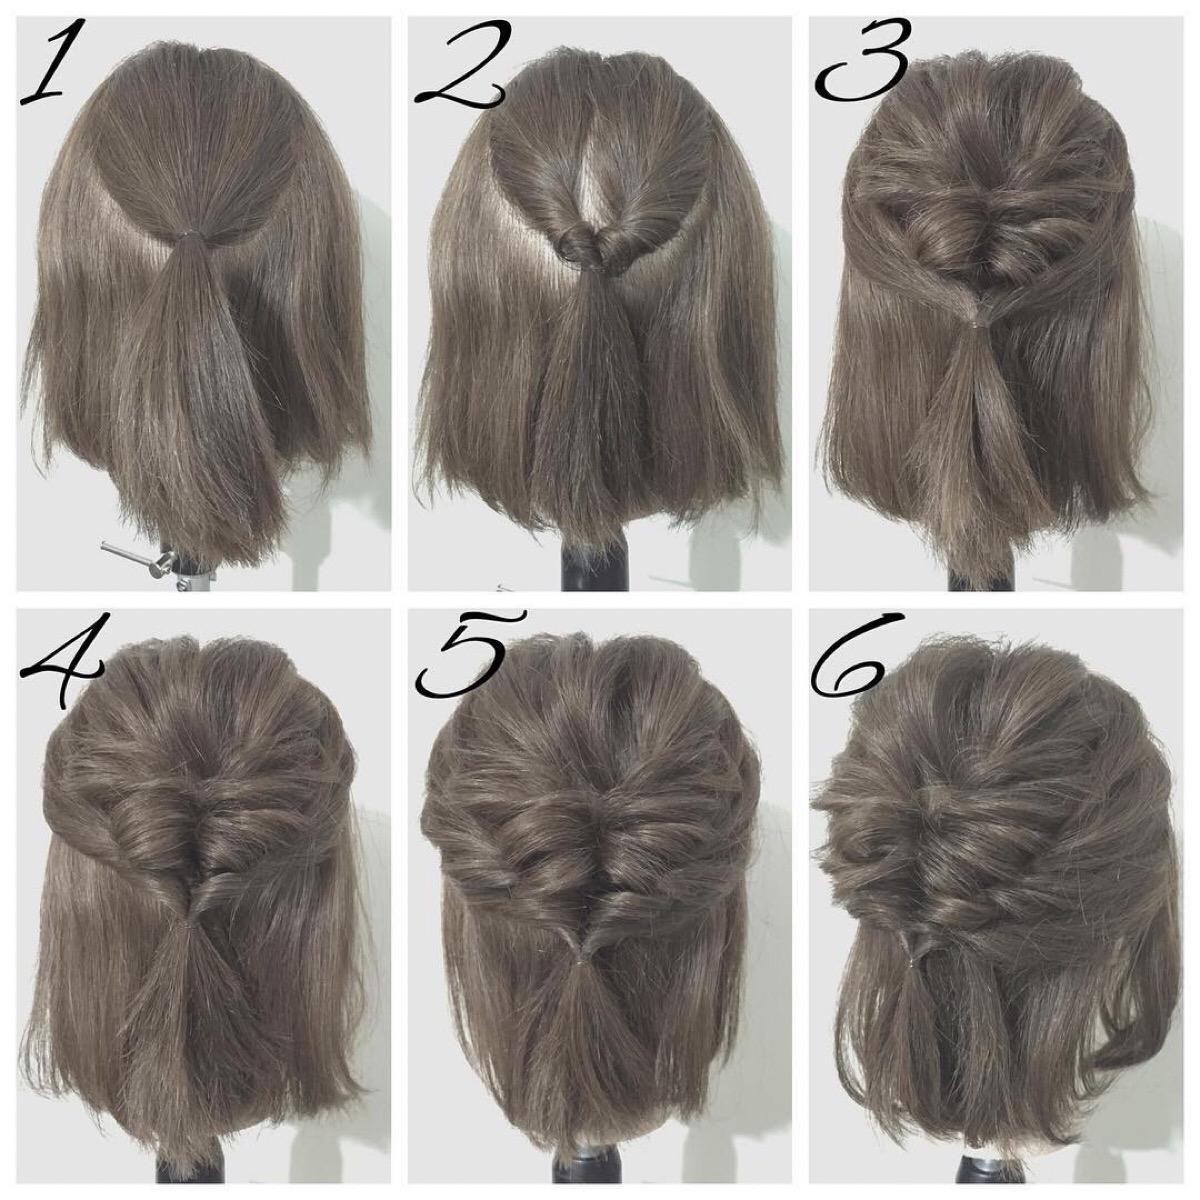 This hairstyle is sent between you and the goddess!